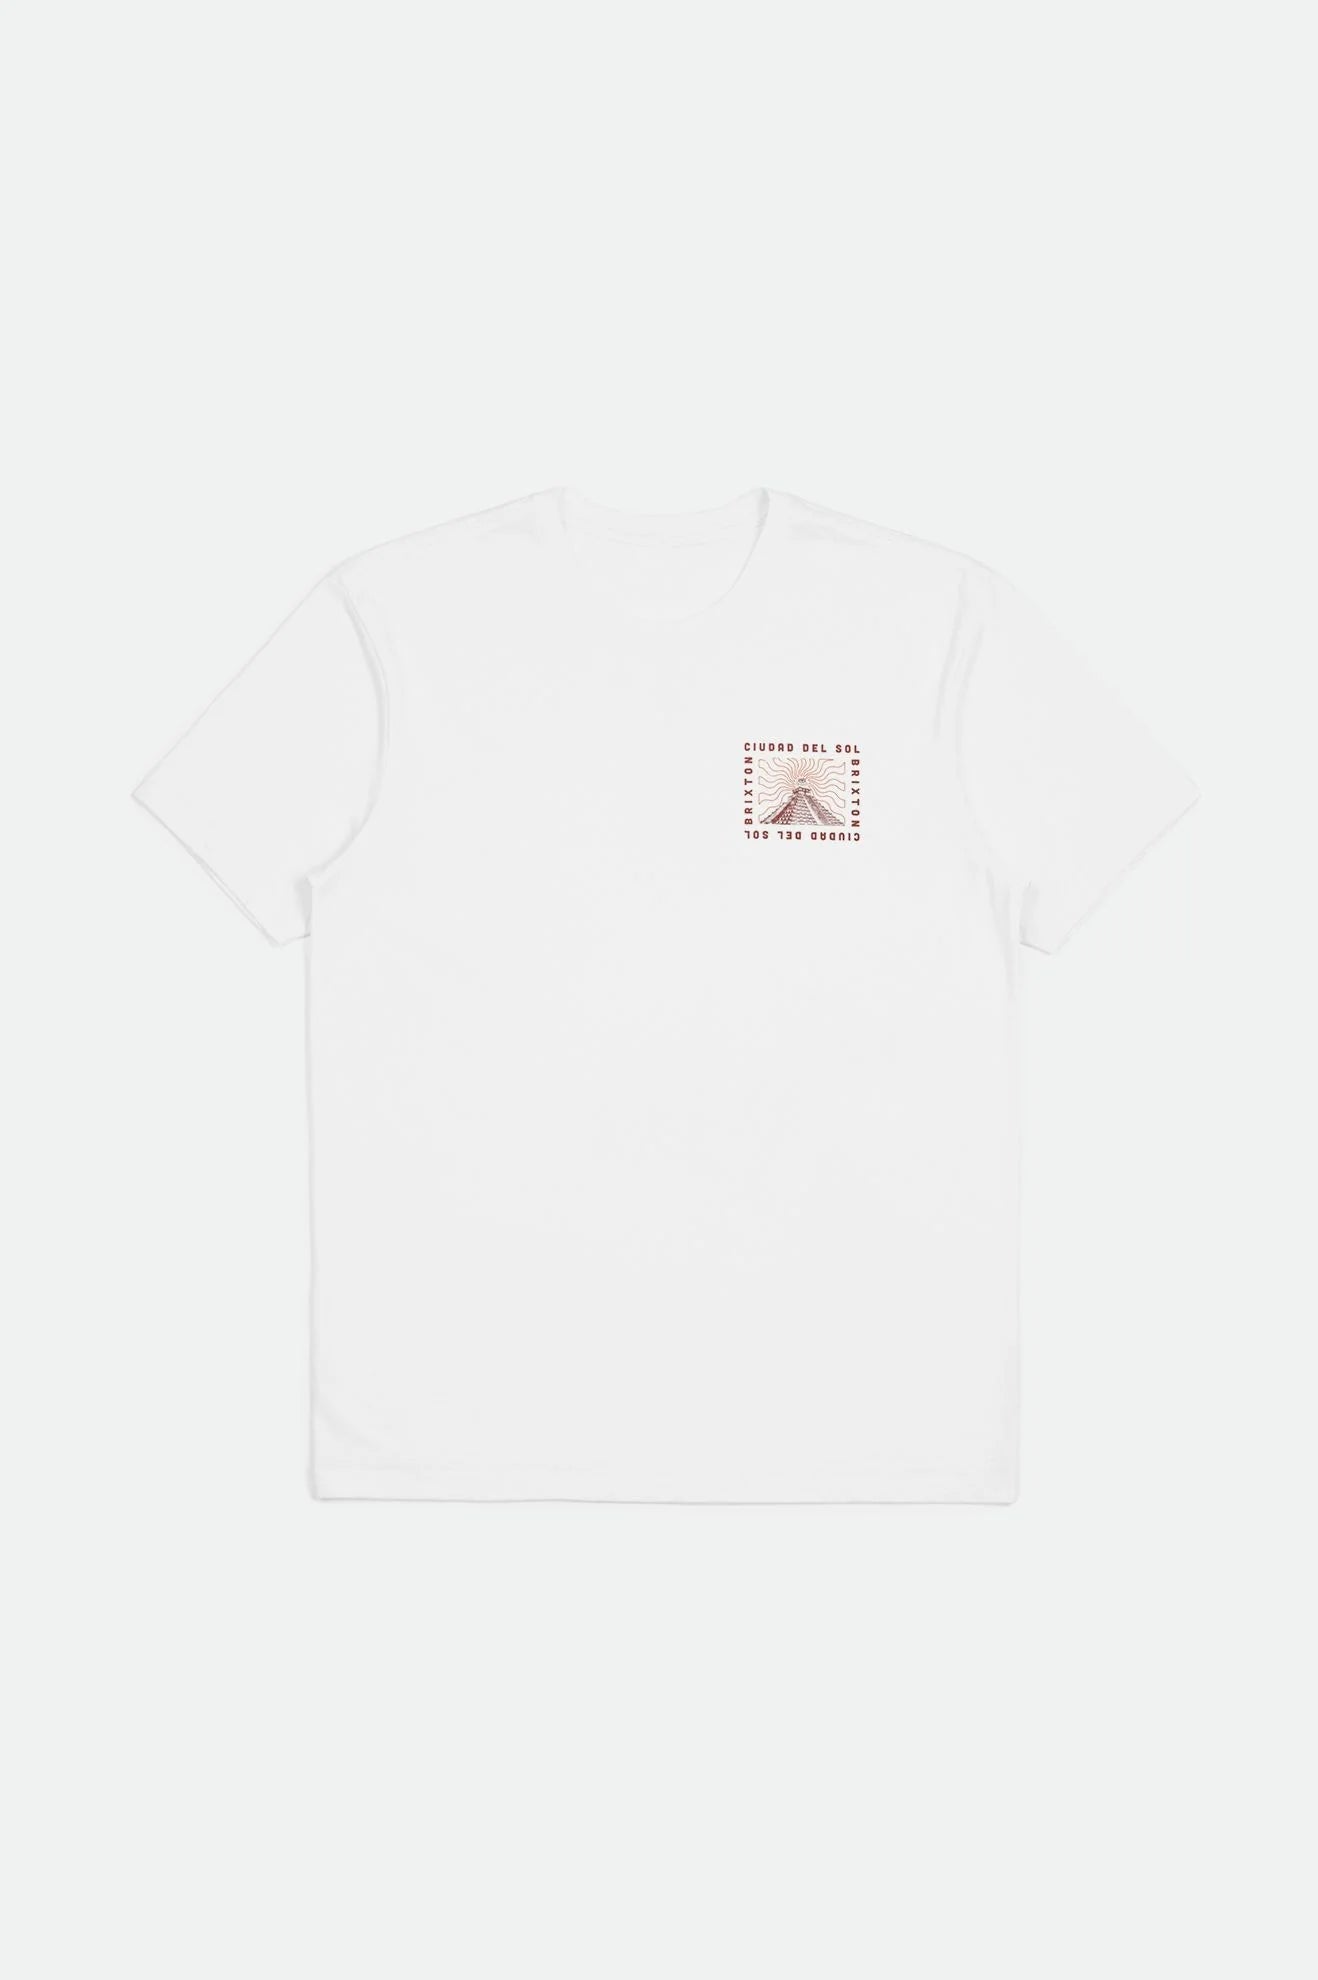 Brixton Del Sol Tee In White - RD1 Clothing